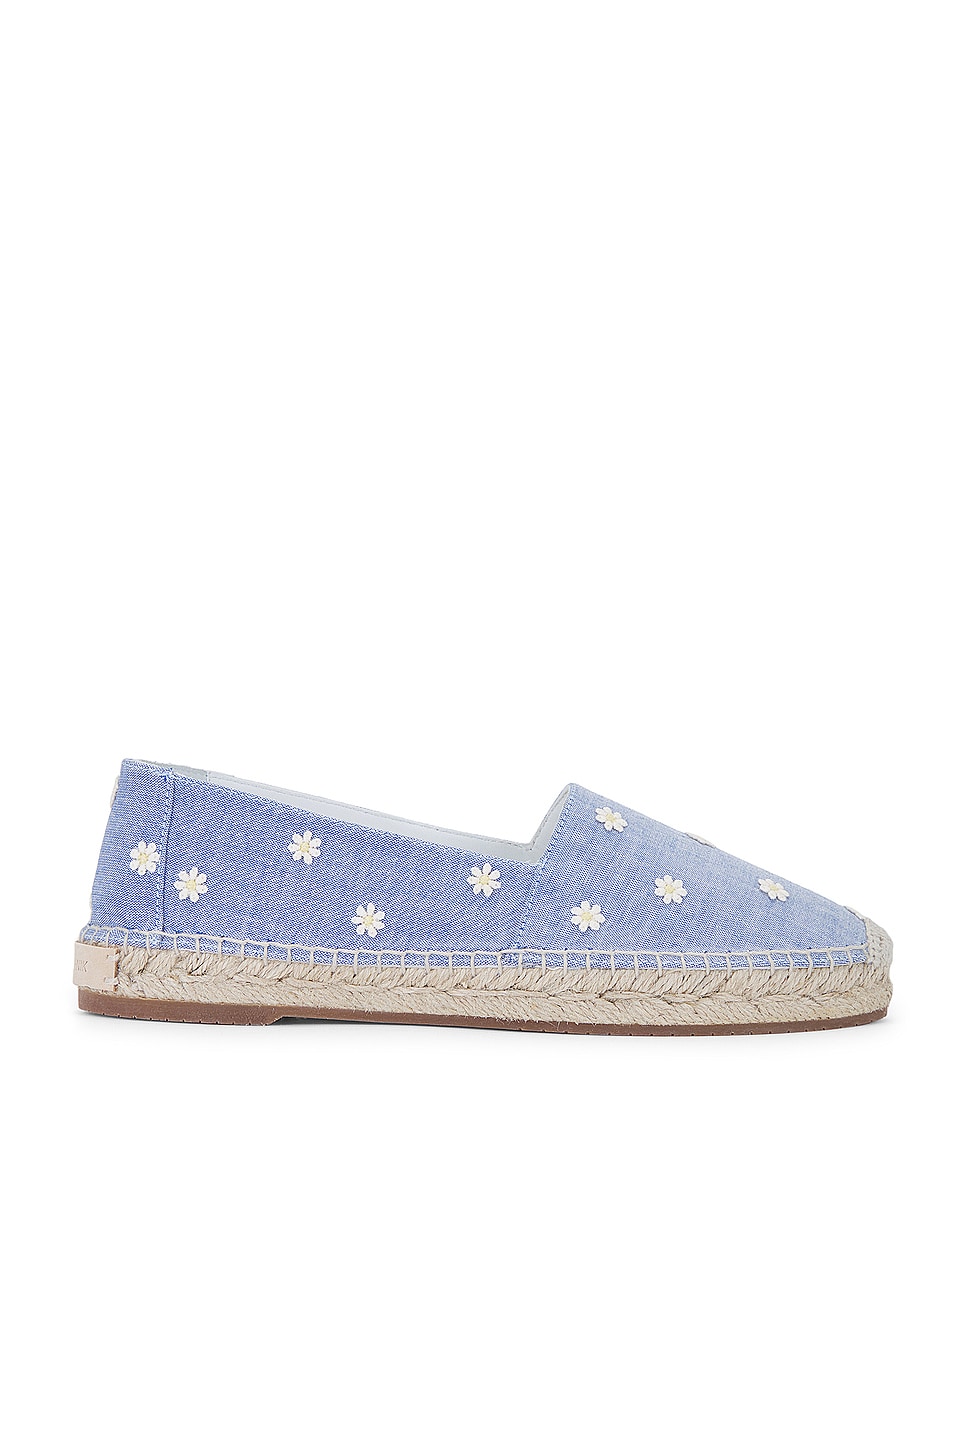 Image 1 of Manolo Blahnik Susille Chambray Espadrilles in Floral Embroidery